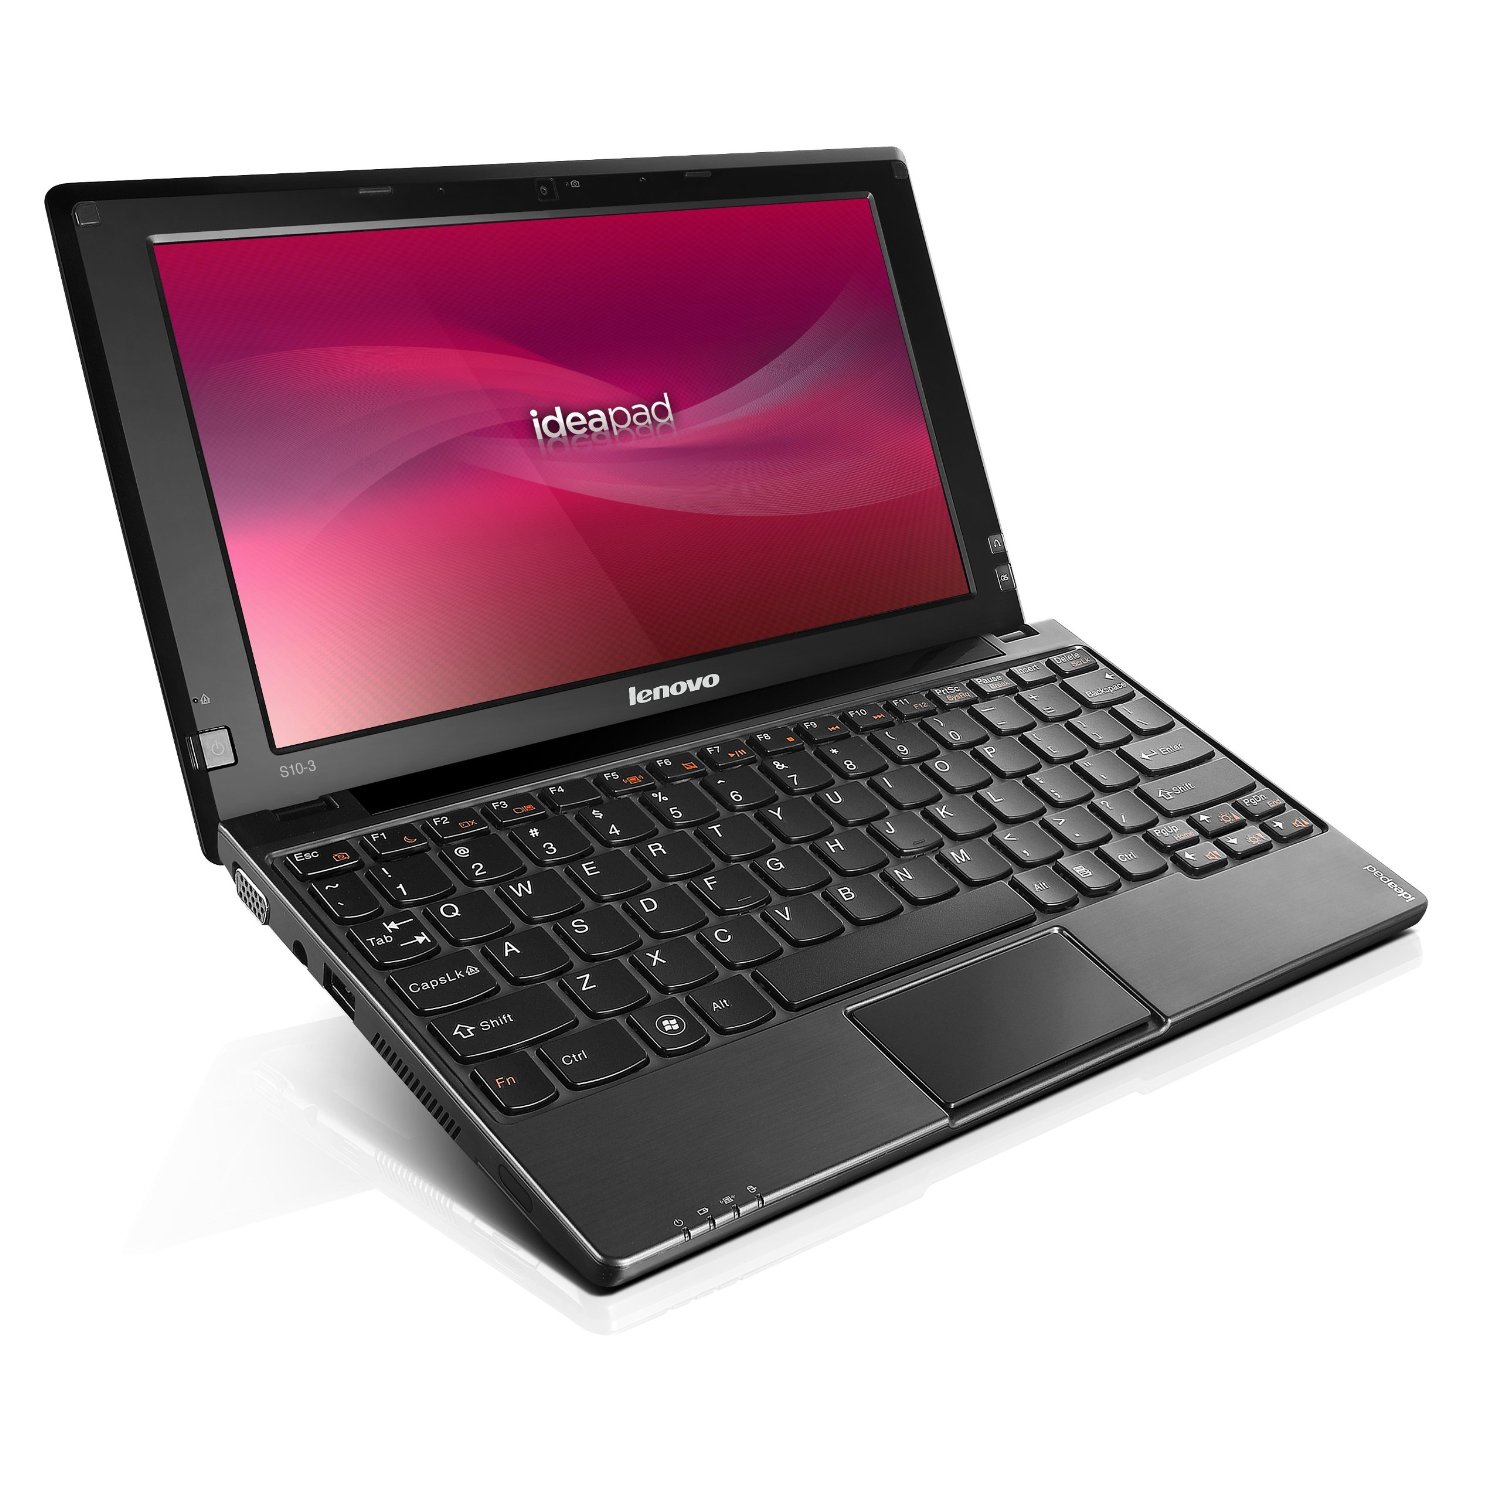 http://thetechjournal.com/wp-content/uploads/images/1112/1322935275-lenovo-ideapad-s103-06472au-101inch-netbook-1.jpg